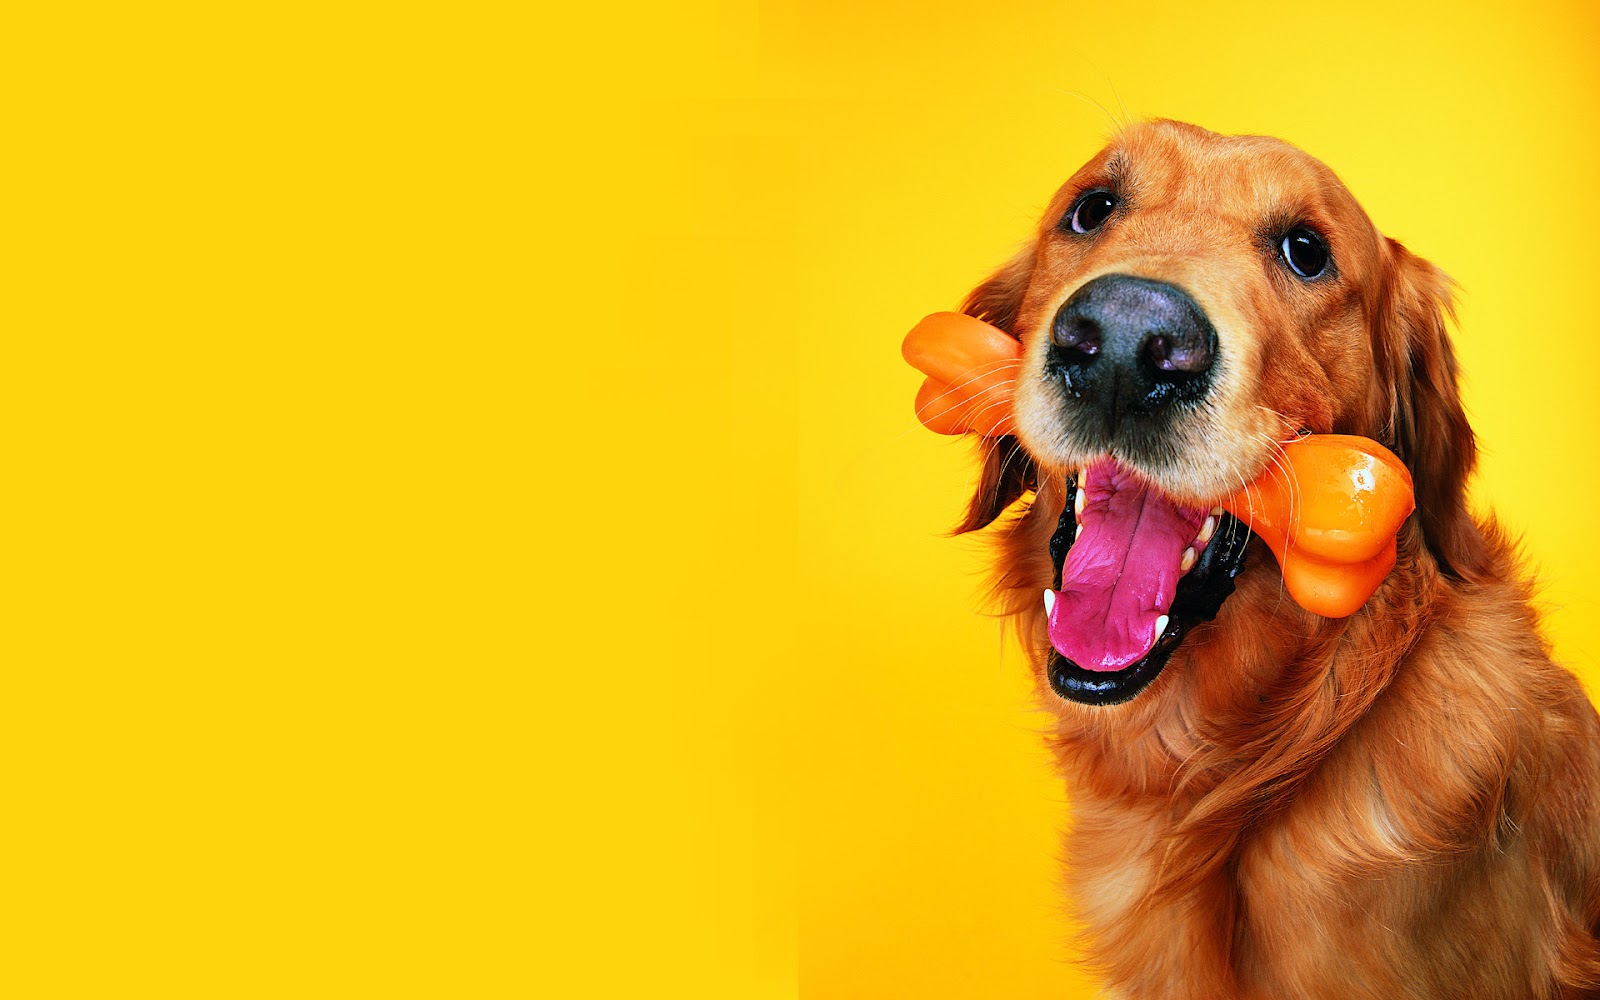 Desktop Funny Hot Dog Pictures Download - Quotes For International Dog Day - HD Wallpaper 